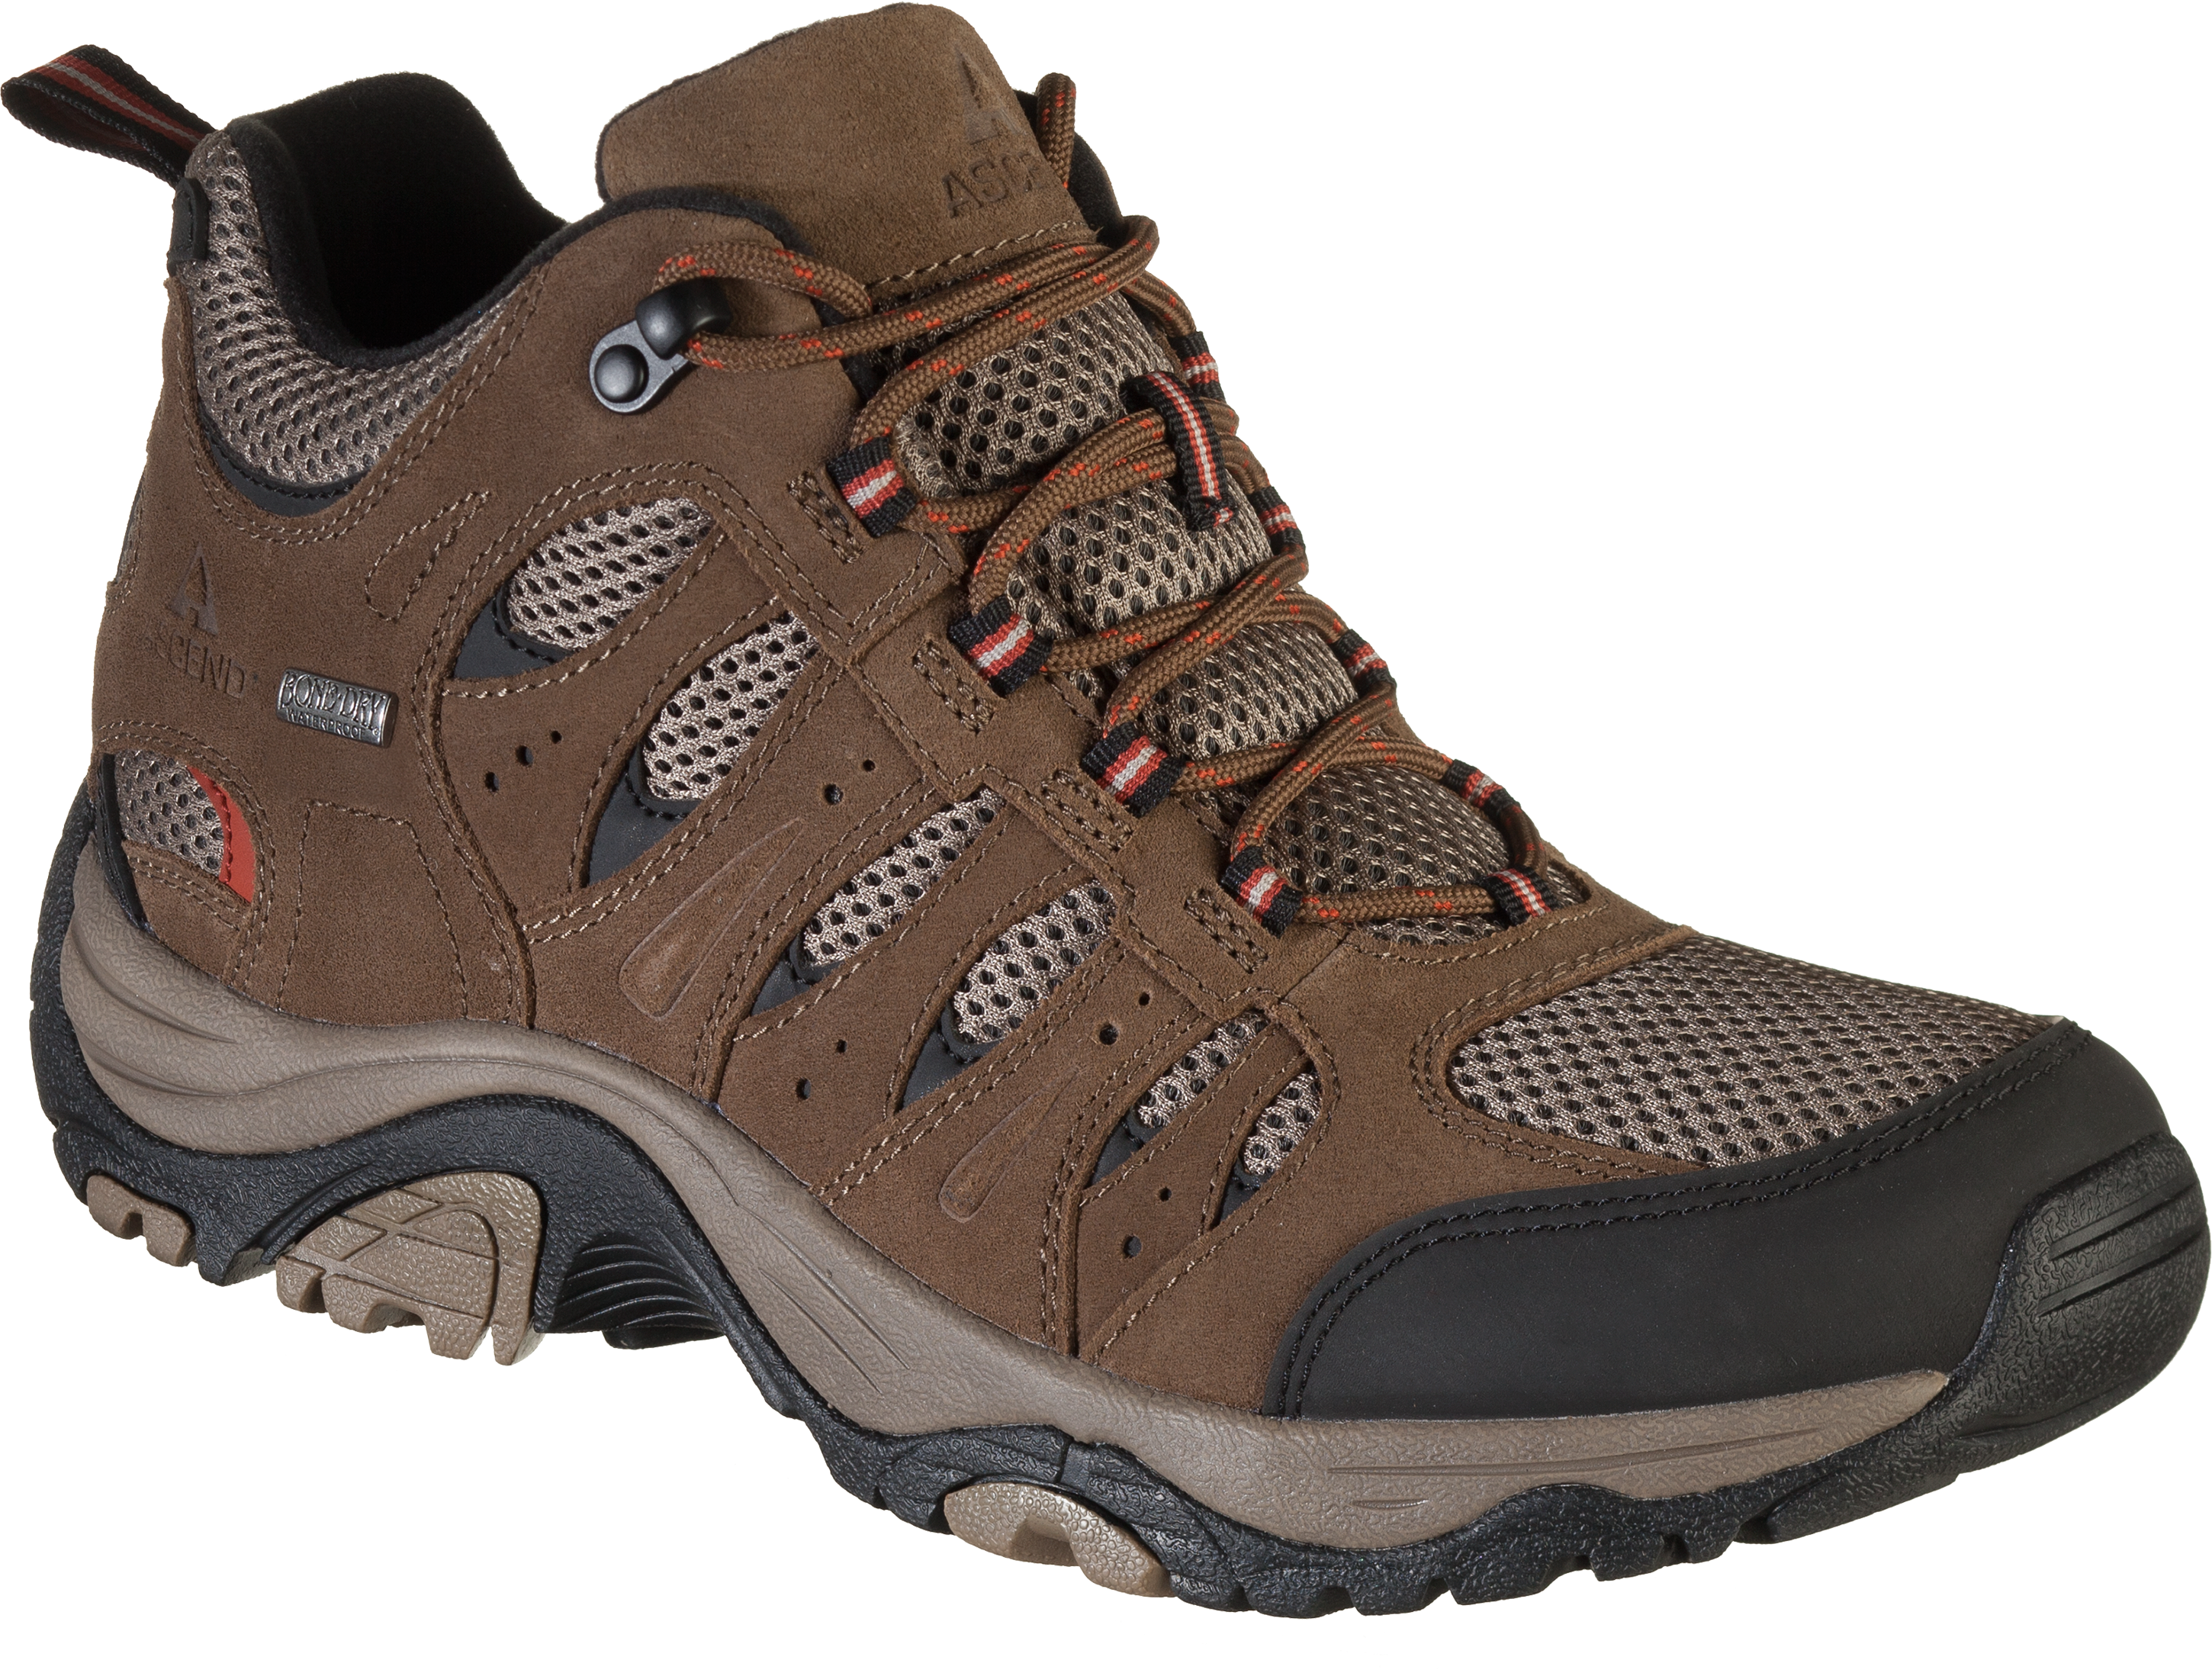 Ascend Lisco Mid Waterproof Hiking Boots for Men - Chocolate - 11M